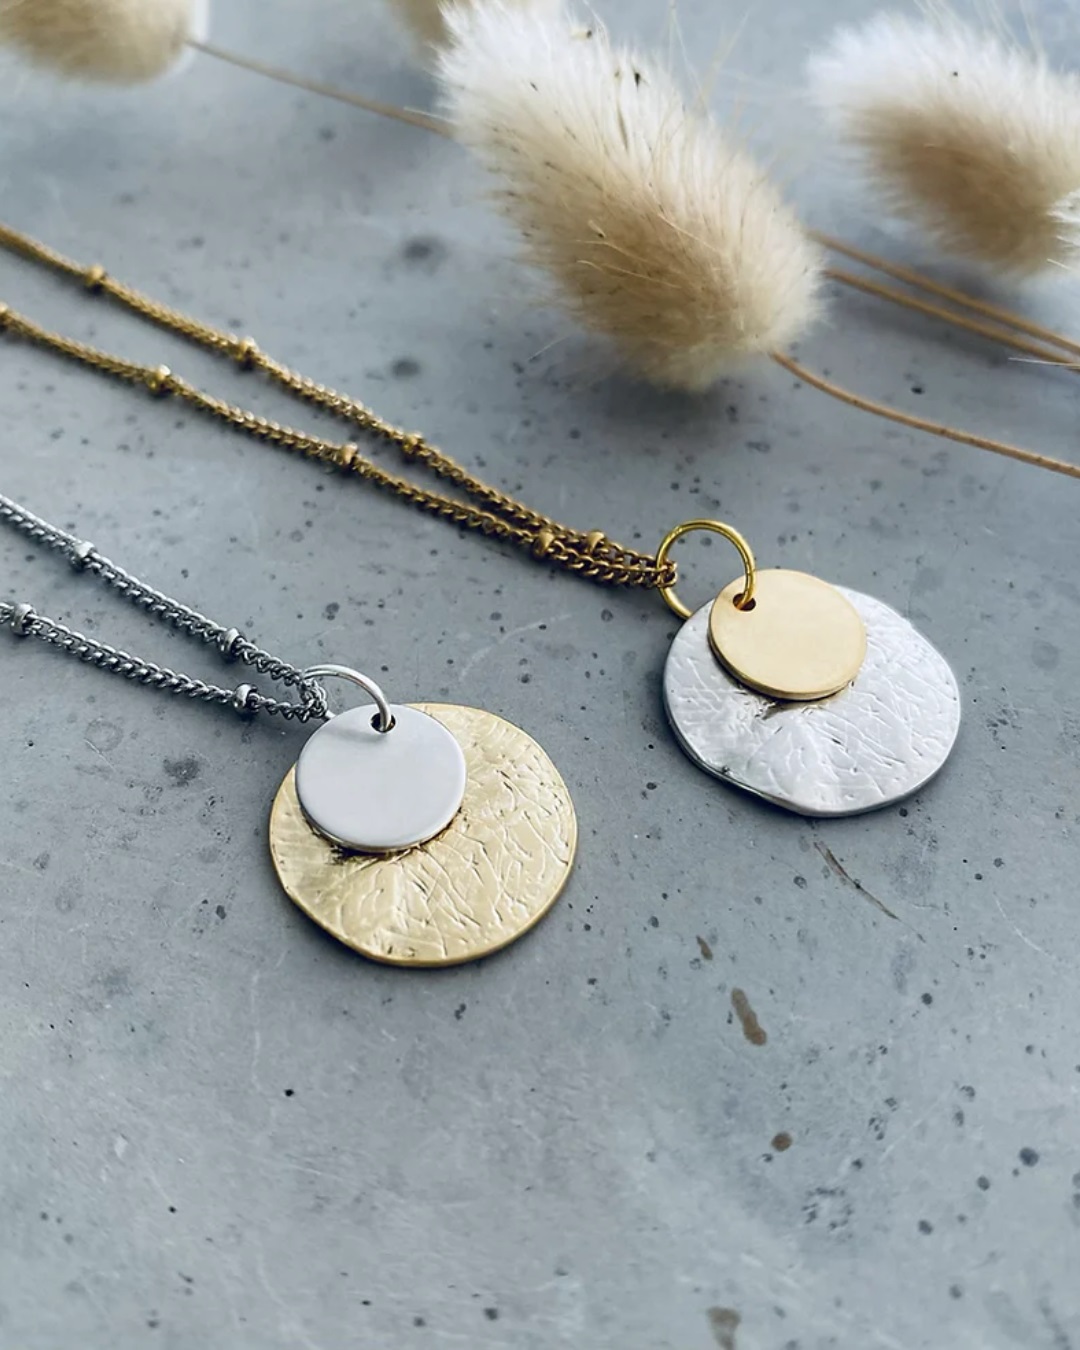 Gold and silver disk necklaces